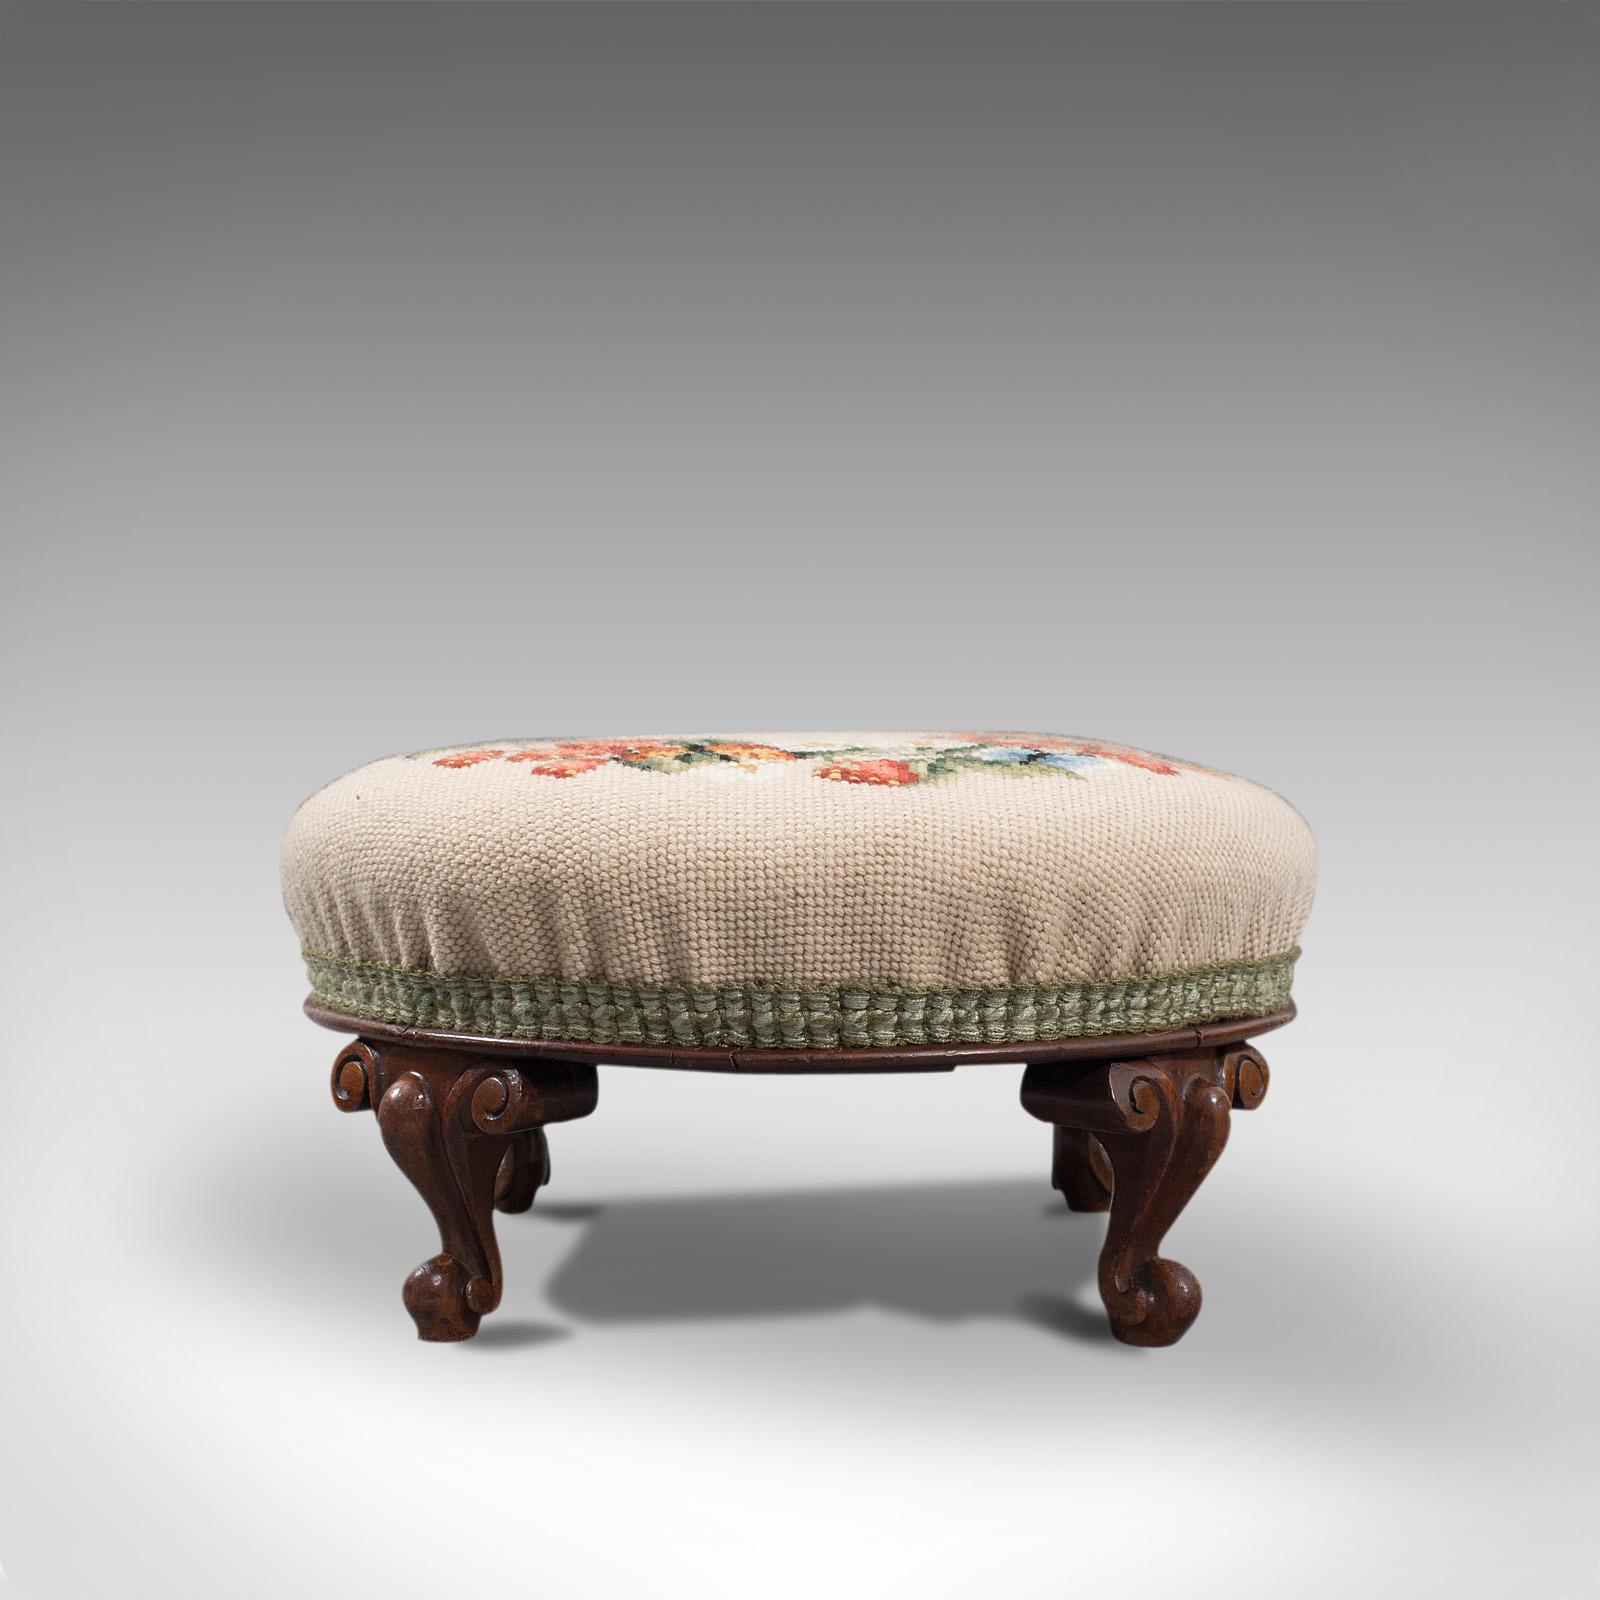 This is a small antique footstool. An English, walnut and needlepoint tapestry covered stool, dating to the early Victorian period, circa 1850.

Comfortable footstool with quality and decorative appeal
Displaying a desirable aged patina -